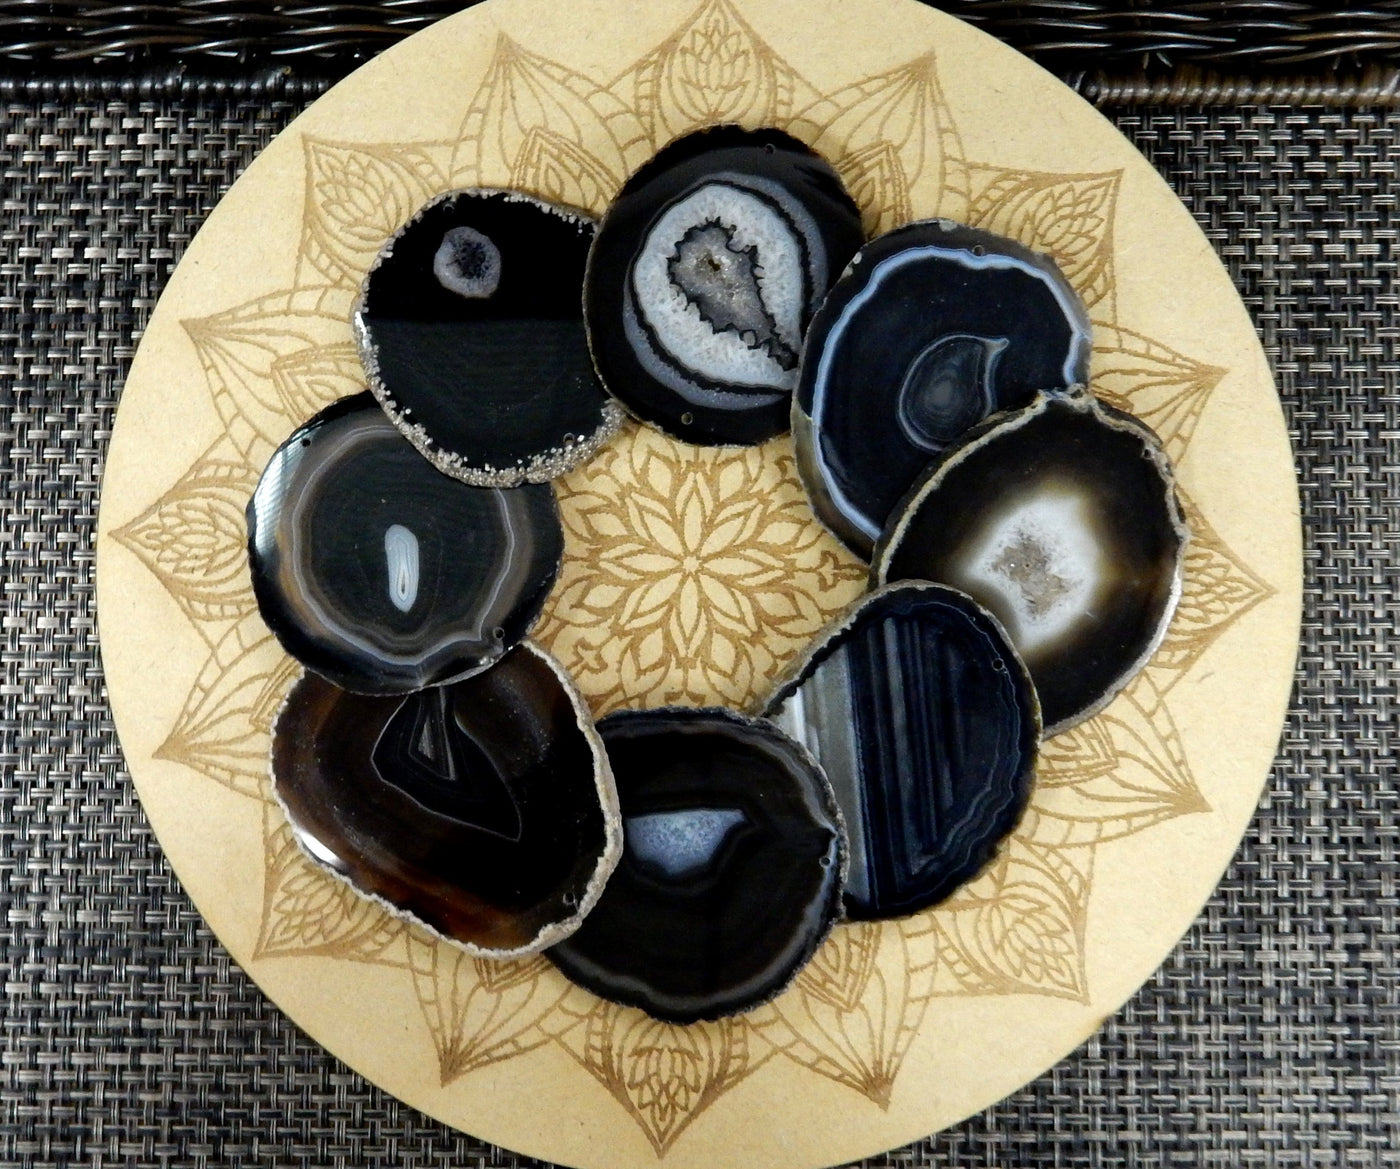 Black agate slices being displayed on a wooden grid.